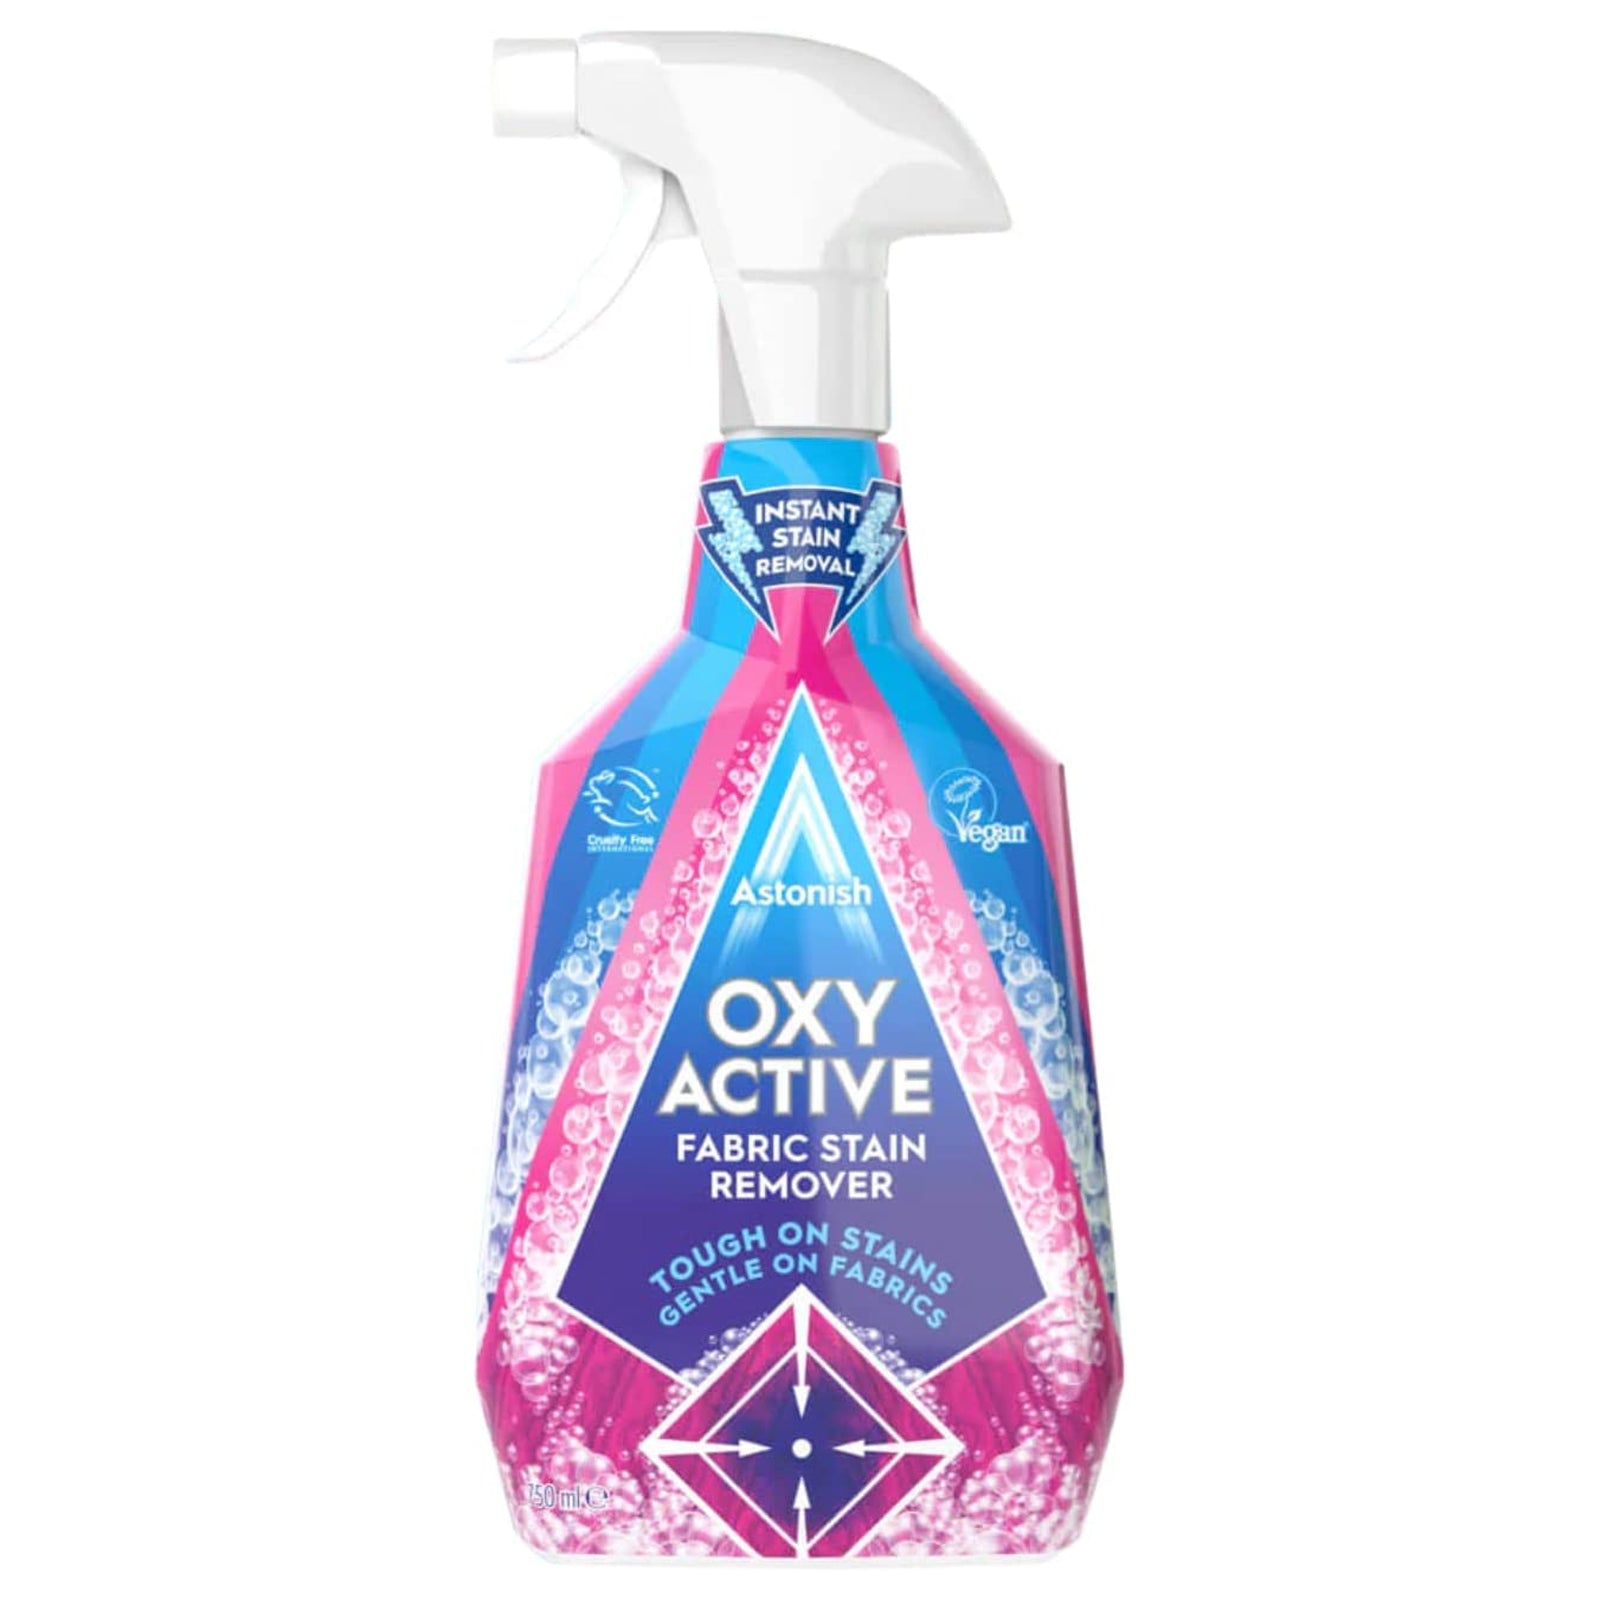 Astonish Oxy Active Fabric Stain Remover Spray 750ml